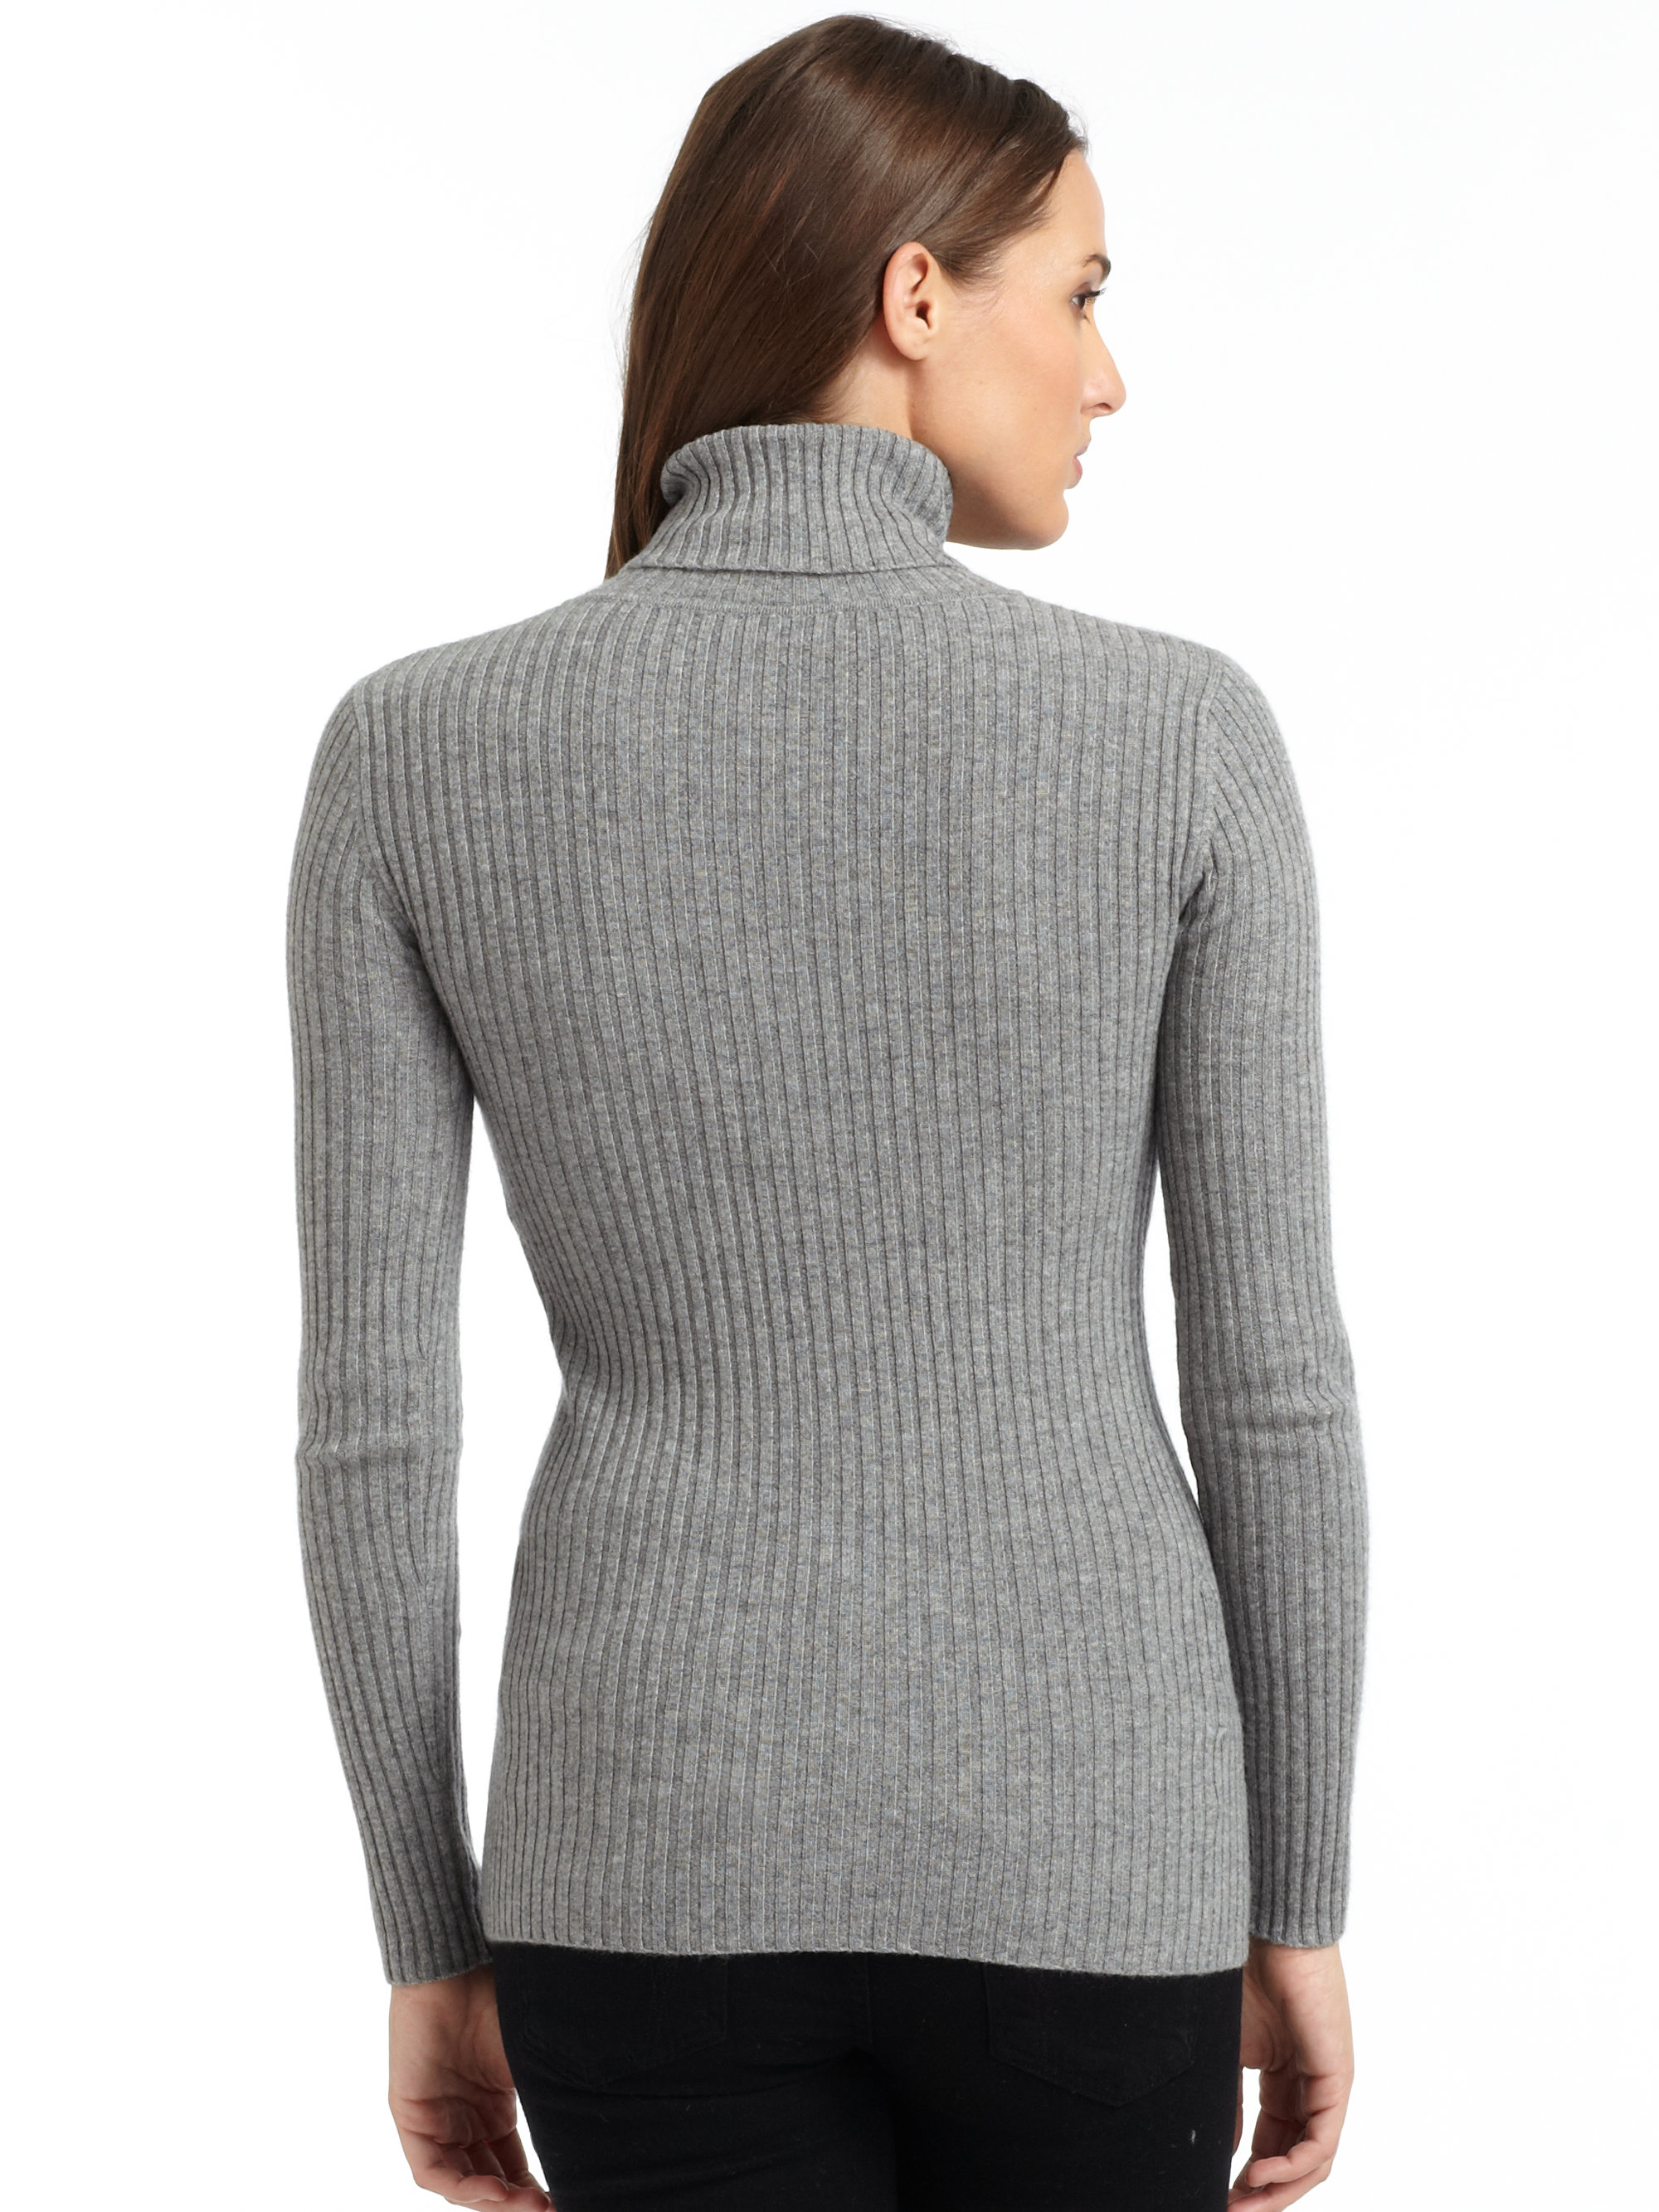 Autumn cashmere Cashmere Ribbed Turtleneck Sweater in Gray | Lyst